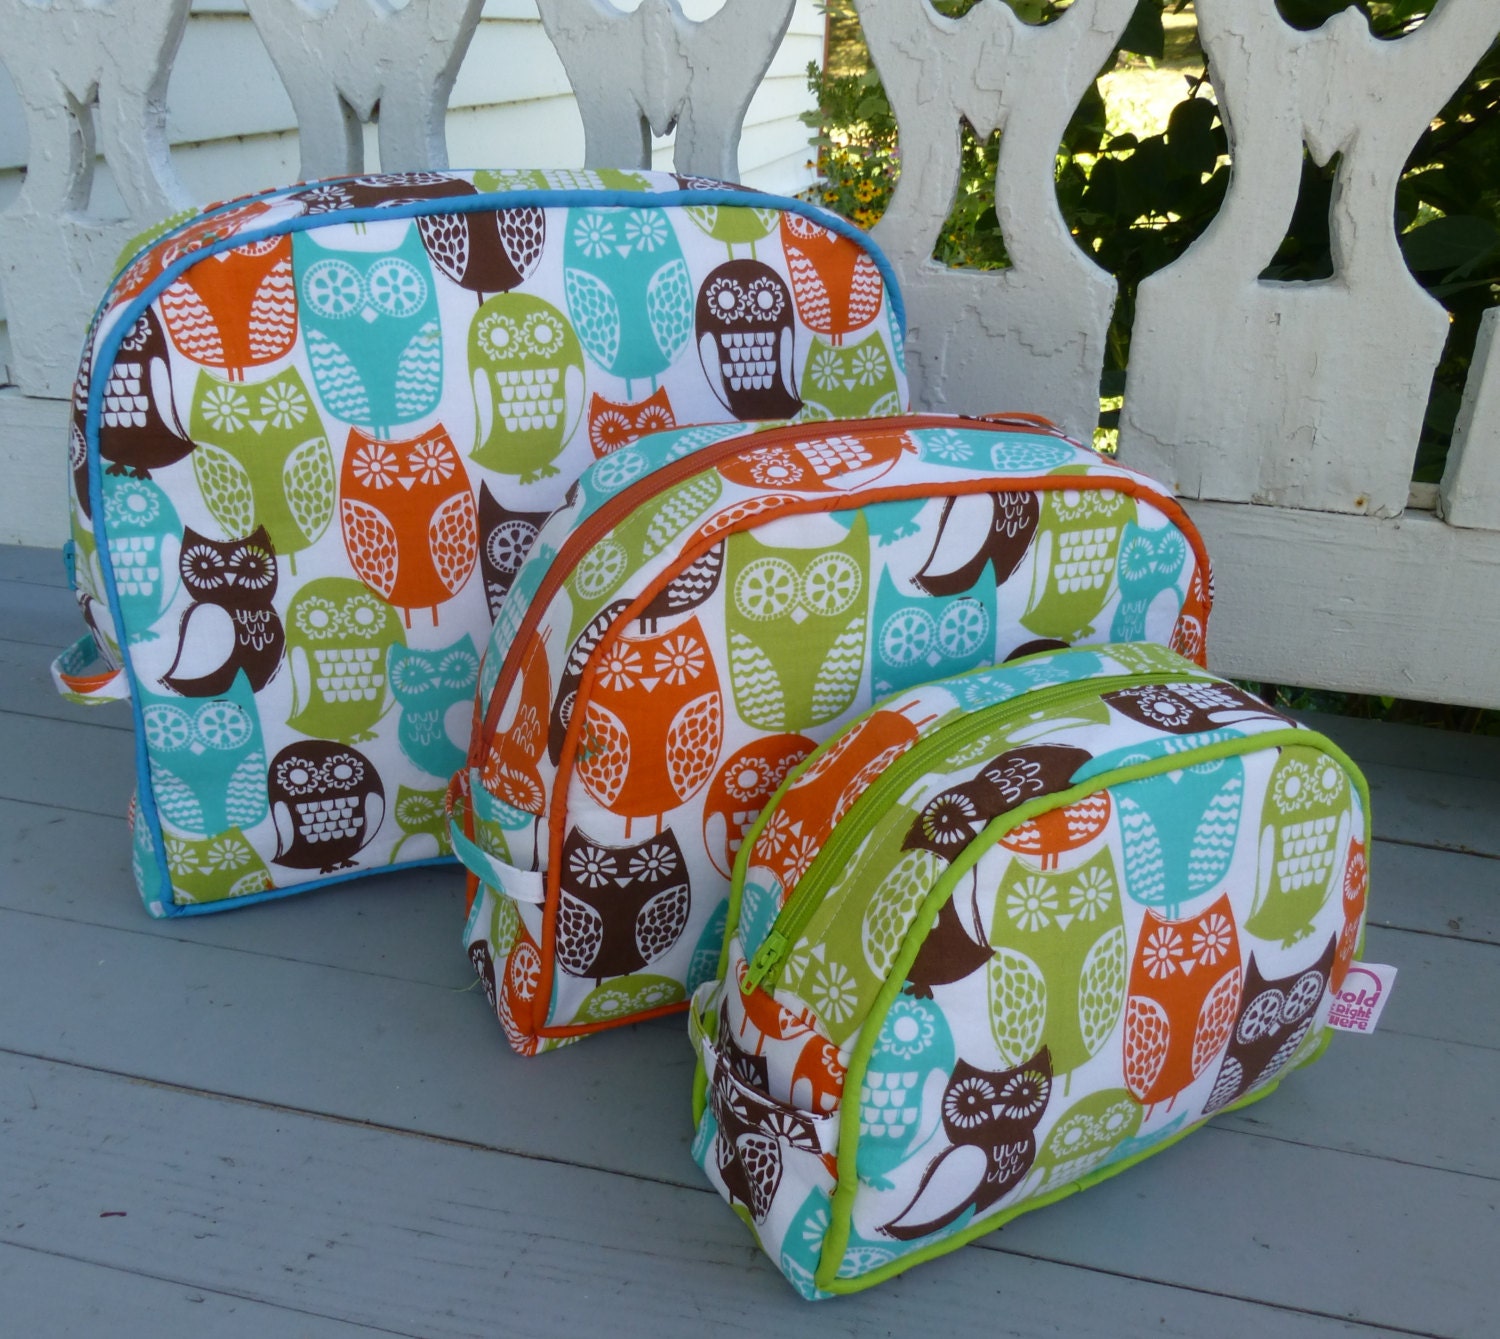 3 COSMETIC BAGS  -  Michael Miller - Swedish Owls Print  - Vinyl interior - Pockets and bound seams - Zippers and piping in matching colors - HolditRightThereBags